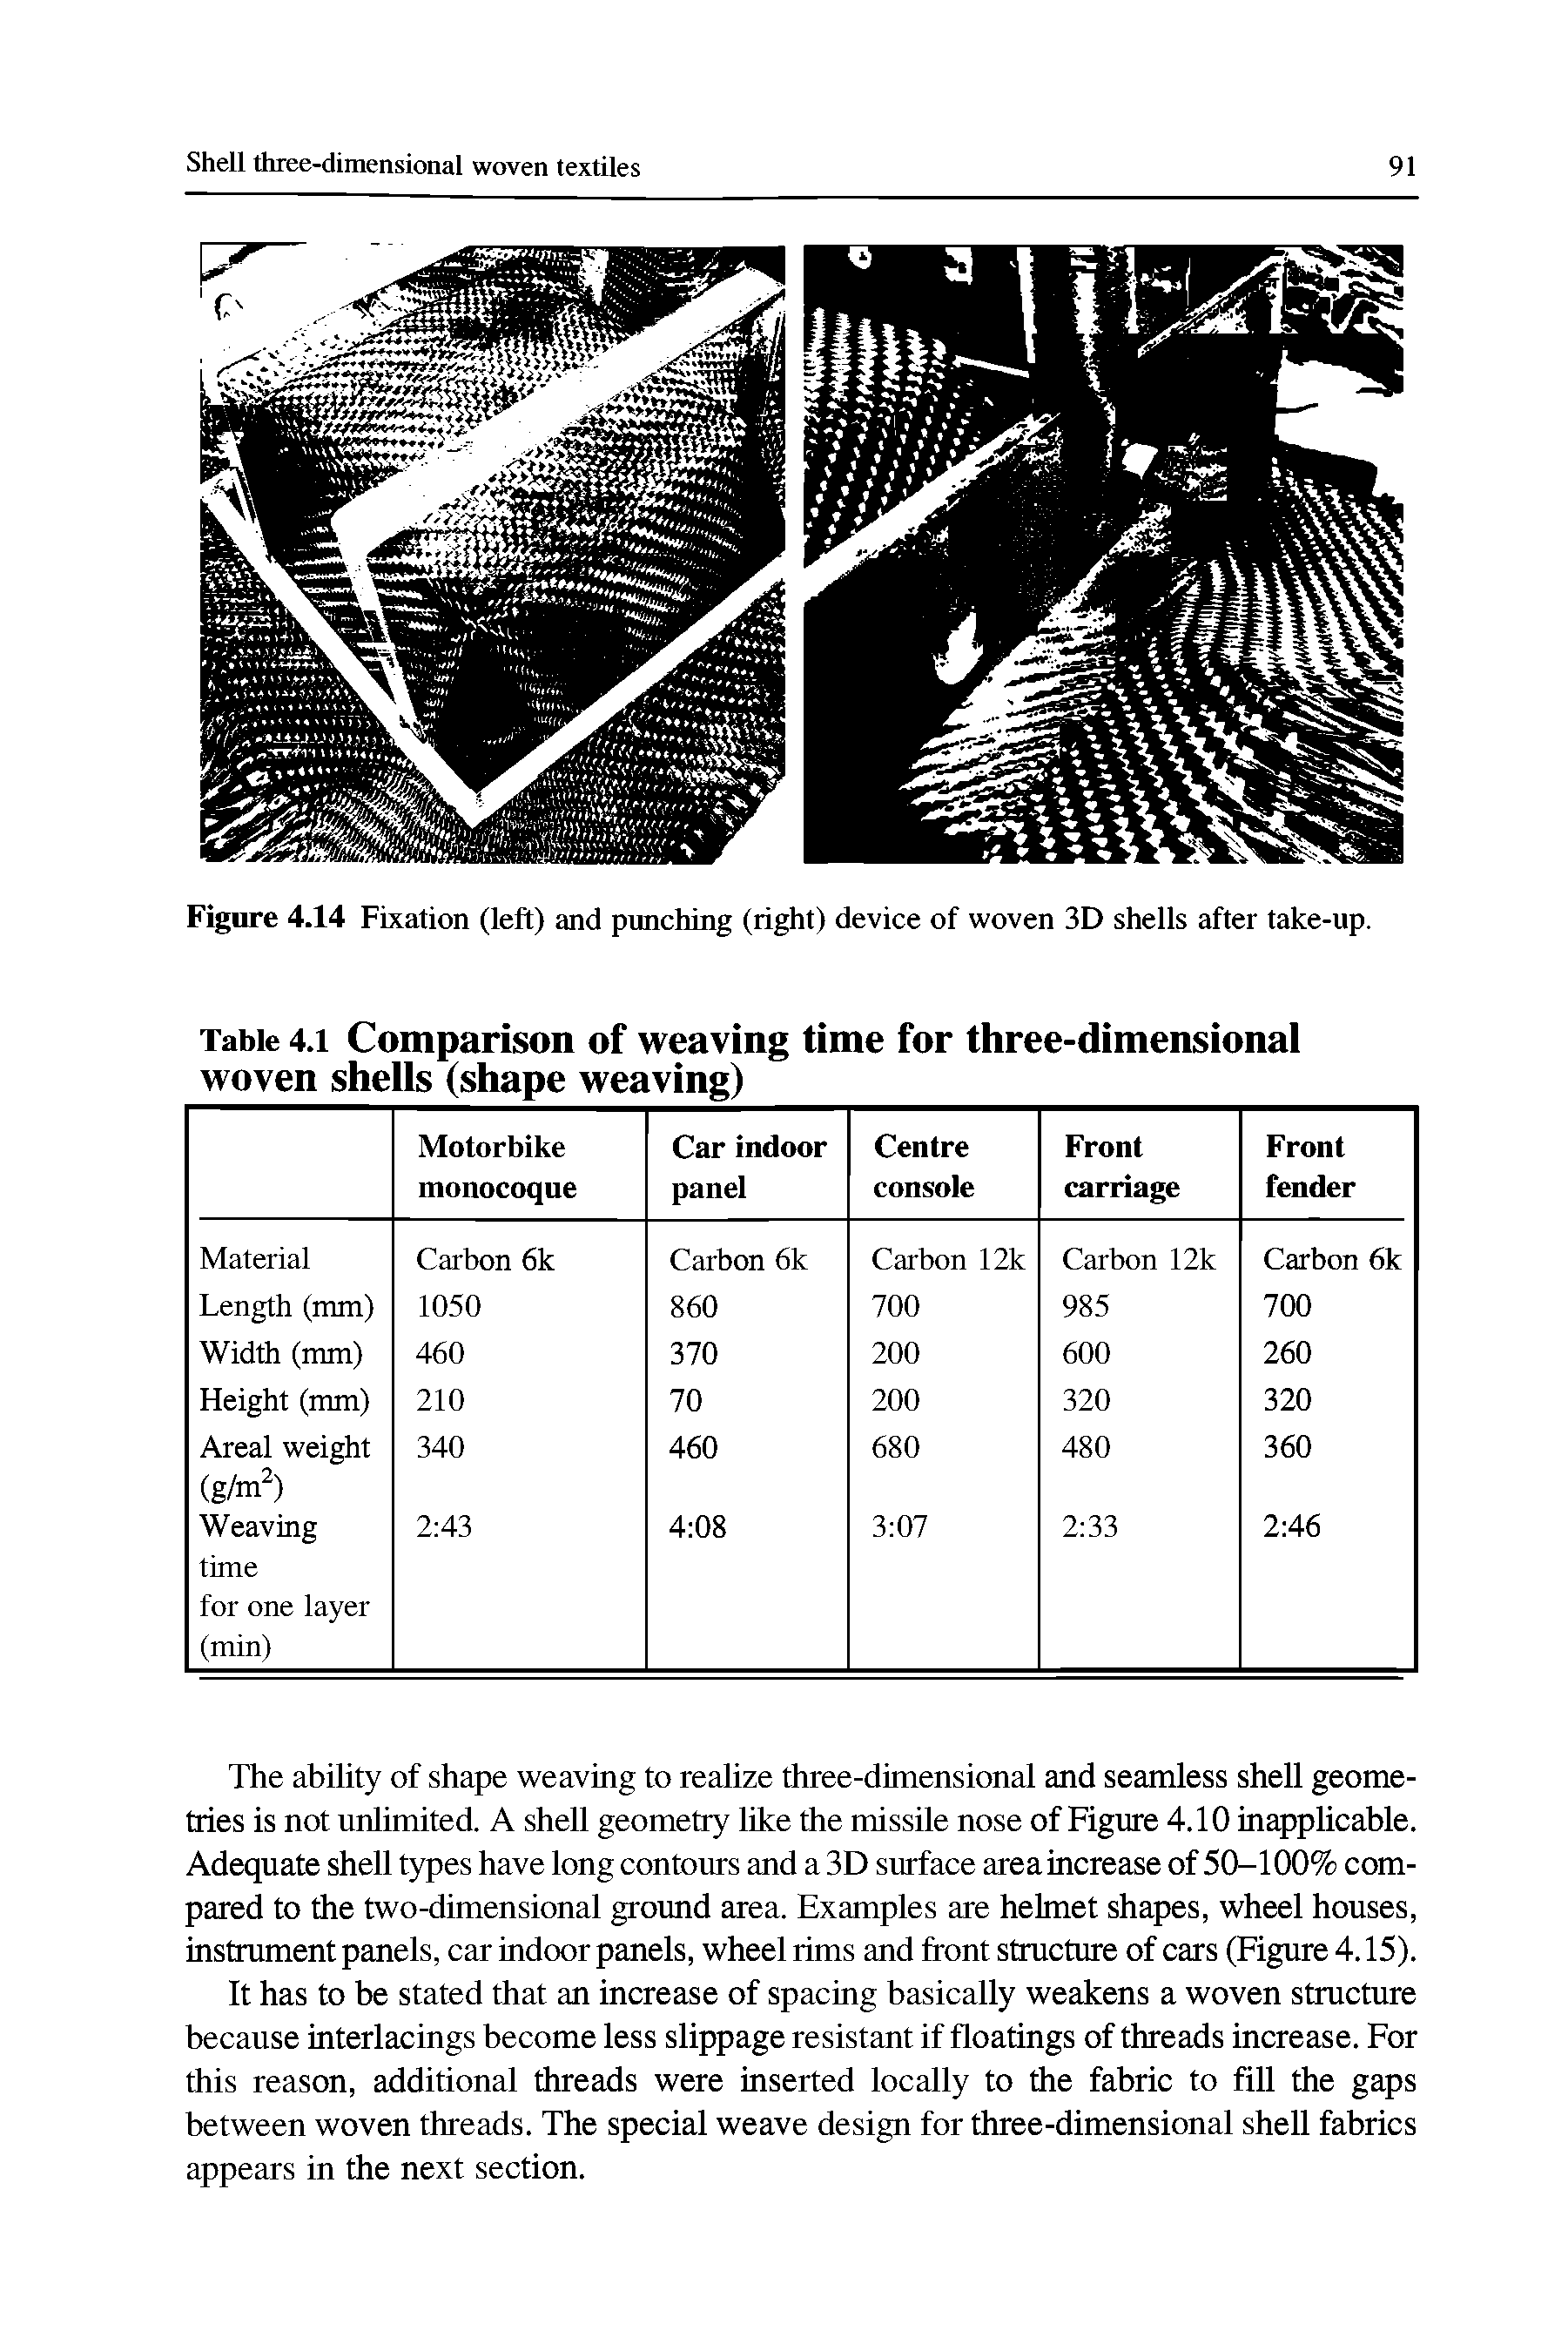 Table 4.1 Comparison of weaving time for three-dimensional woven shells (shape weaving)...